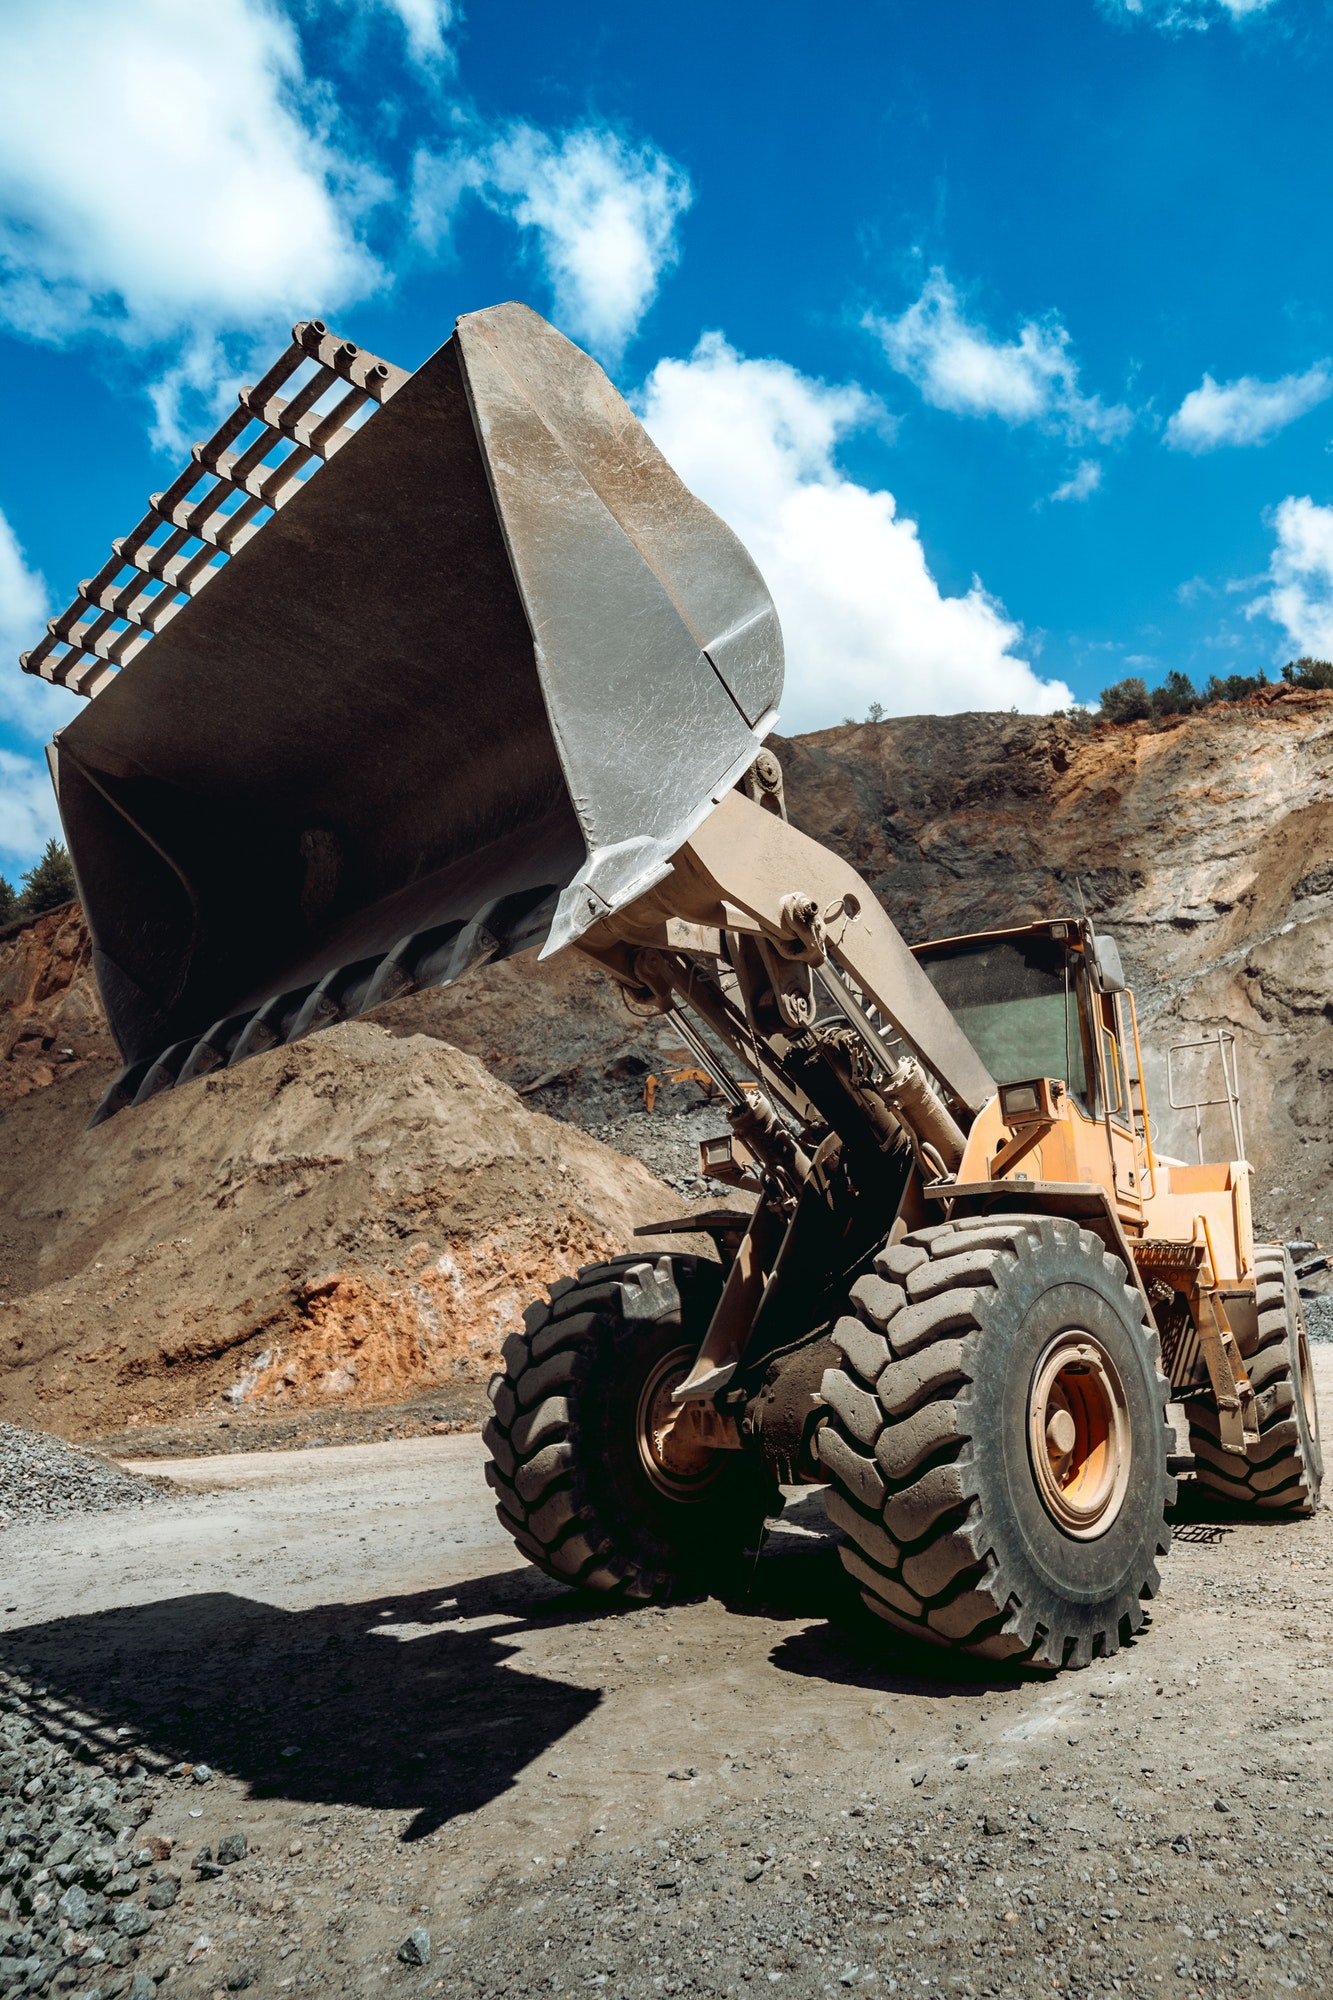 Wheel loader working at gravel during mining operations